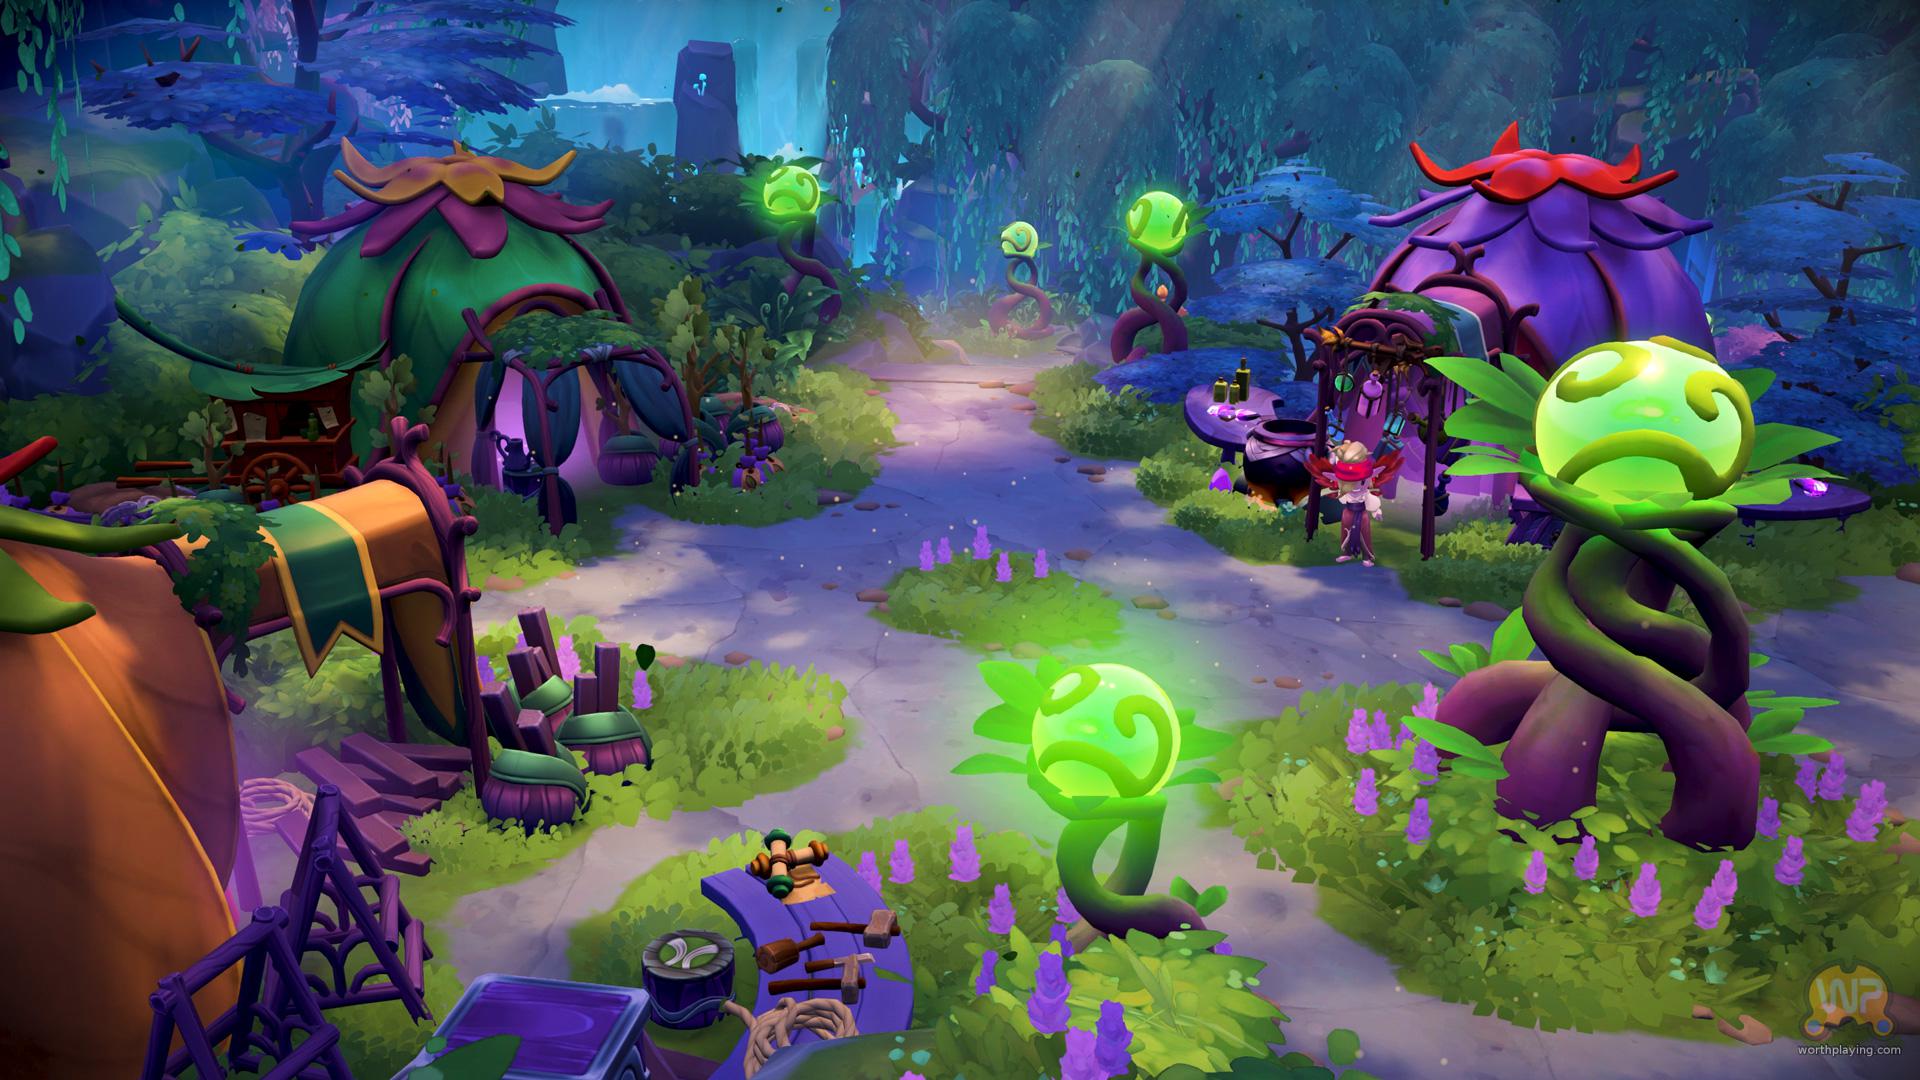 Crossplay Coming? Plants vs Zombies Battle for Neighborville! 